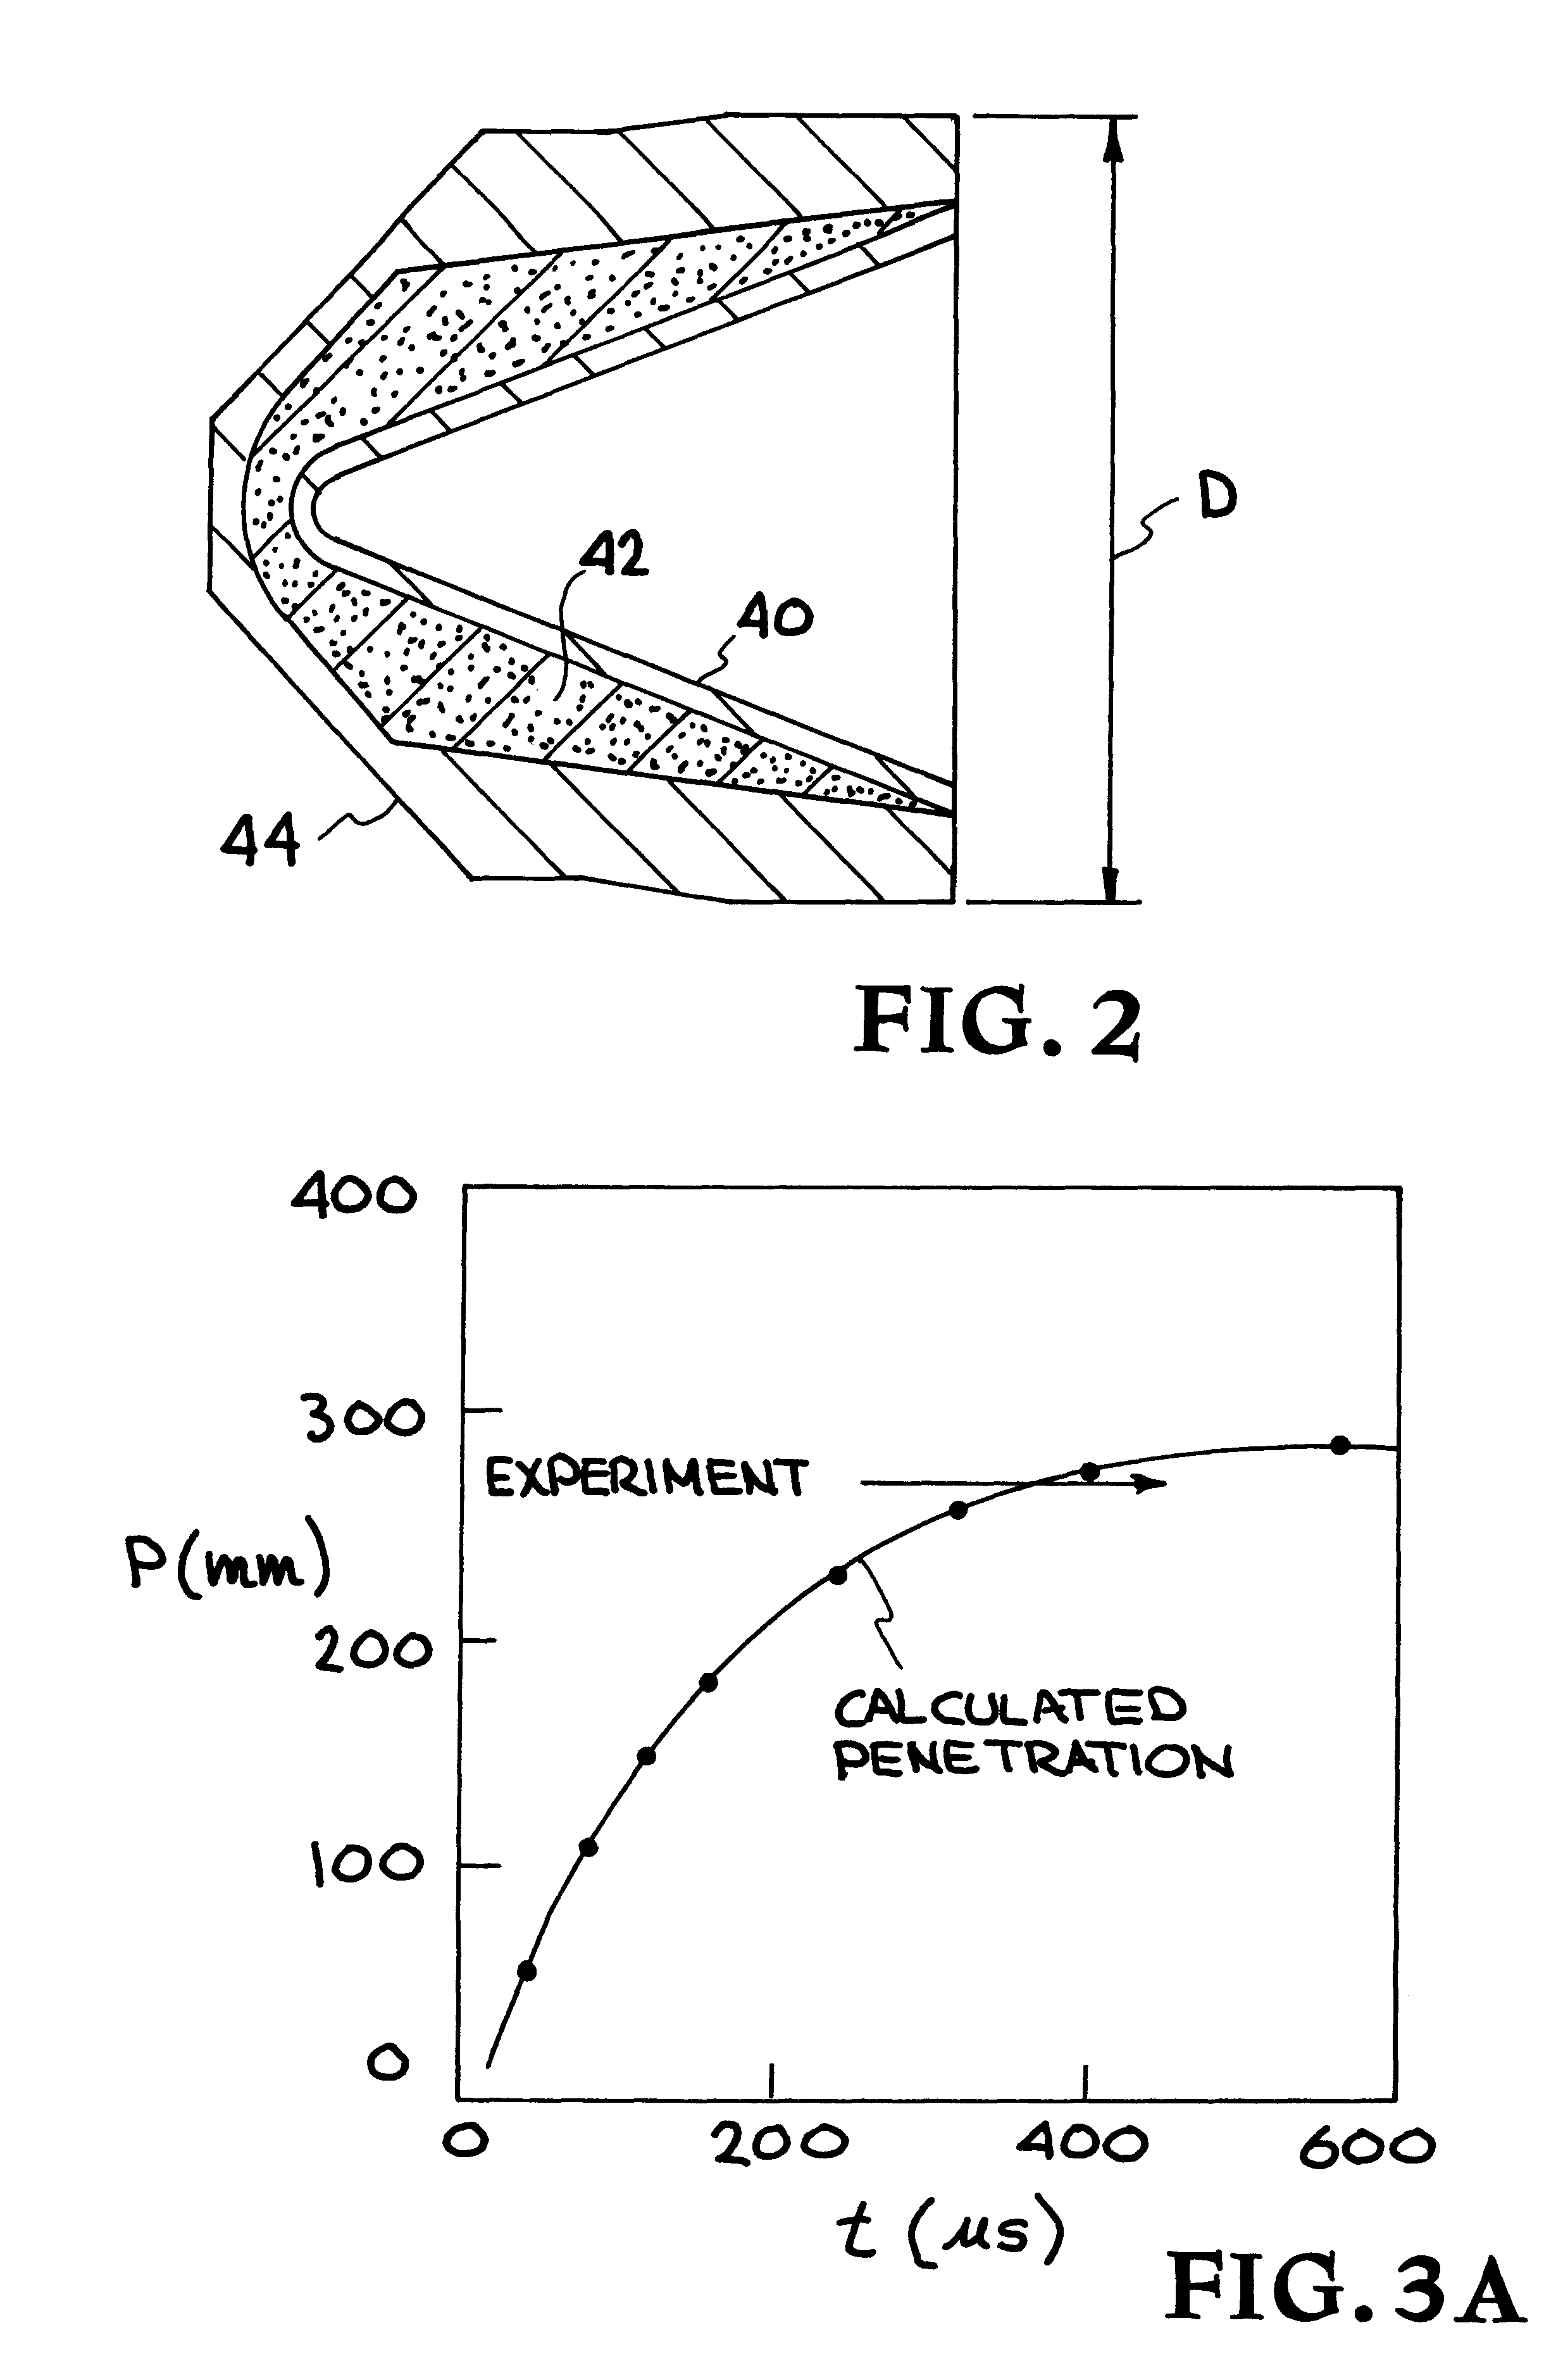 Pressure enhanced penetration with shaped charge perforators